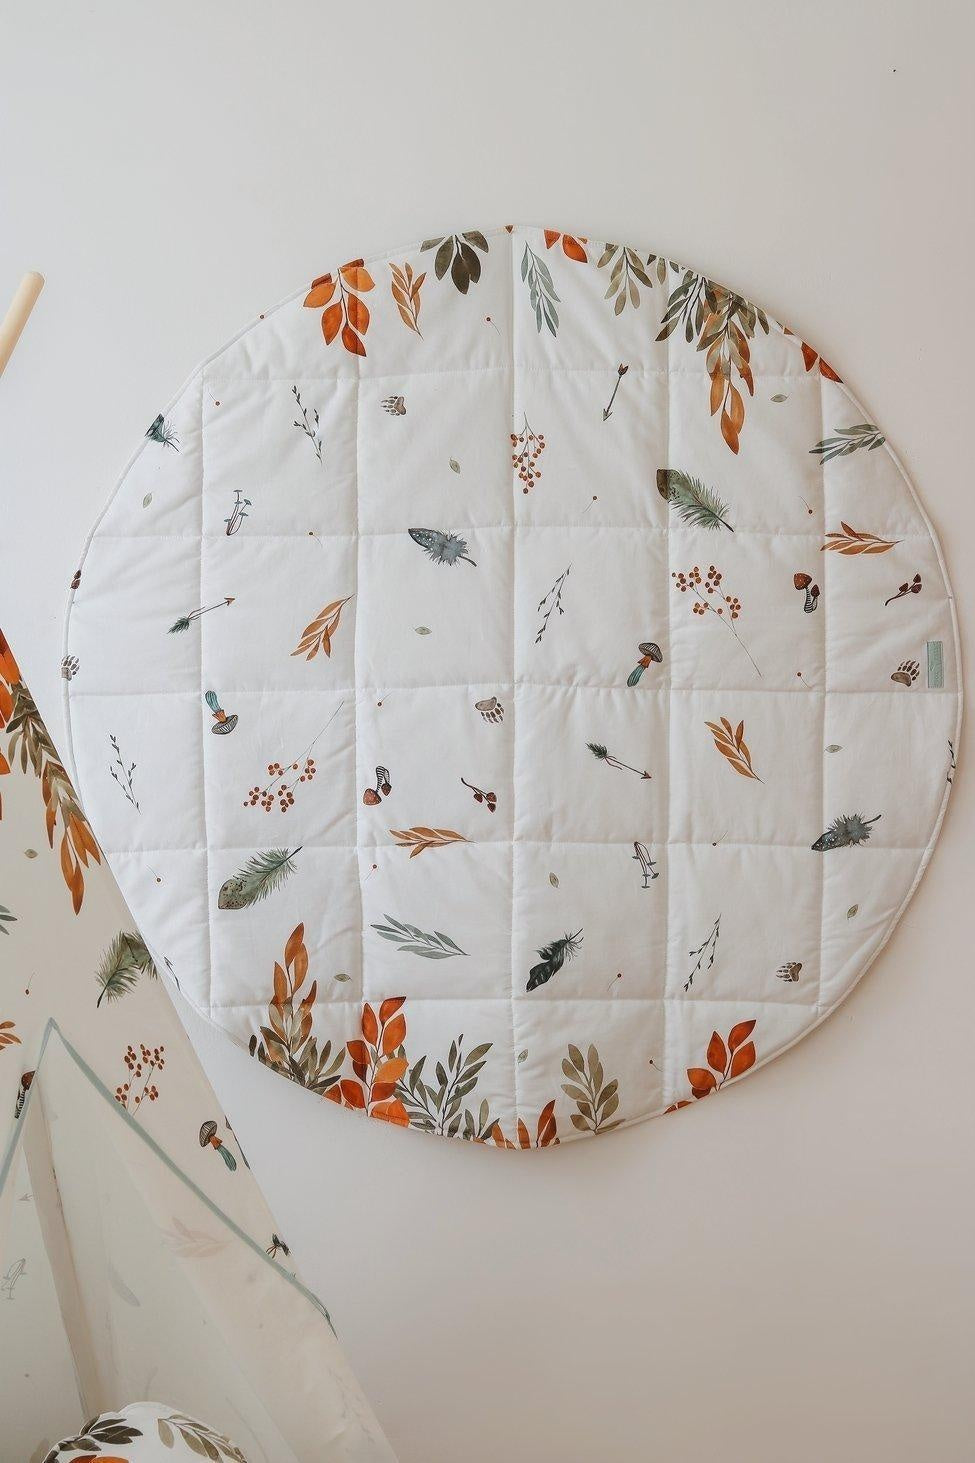 “Forest Friends” Round Cotton Mat by Moi Mili